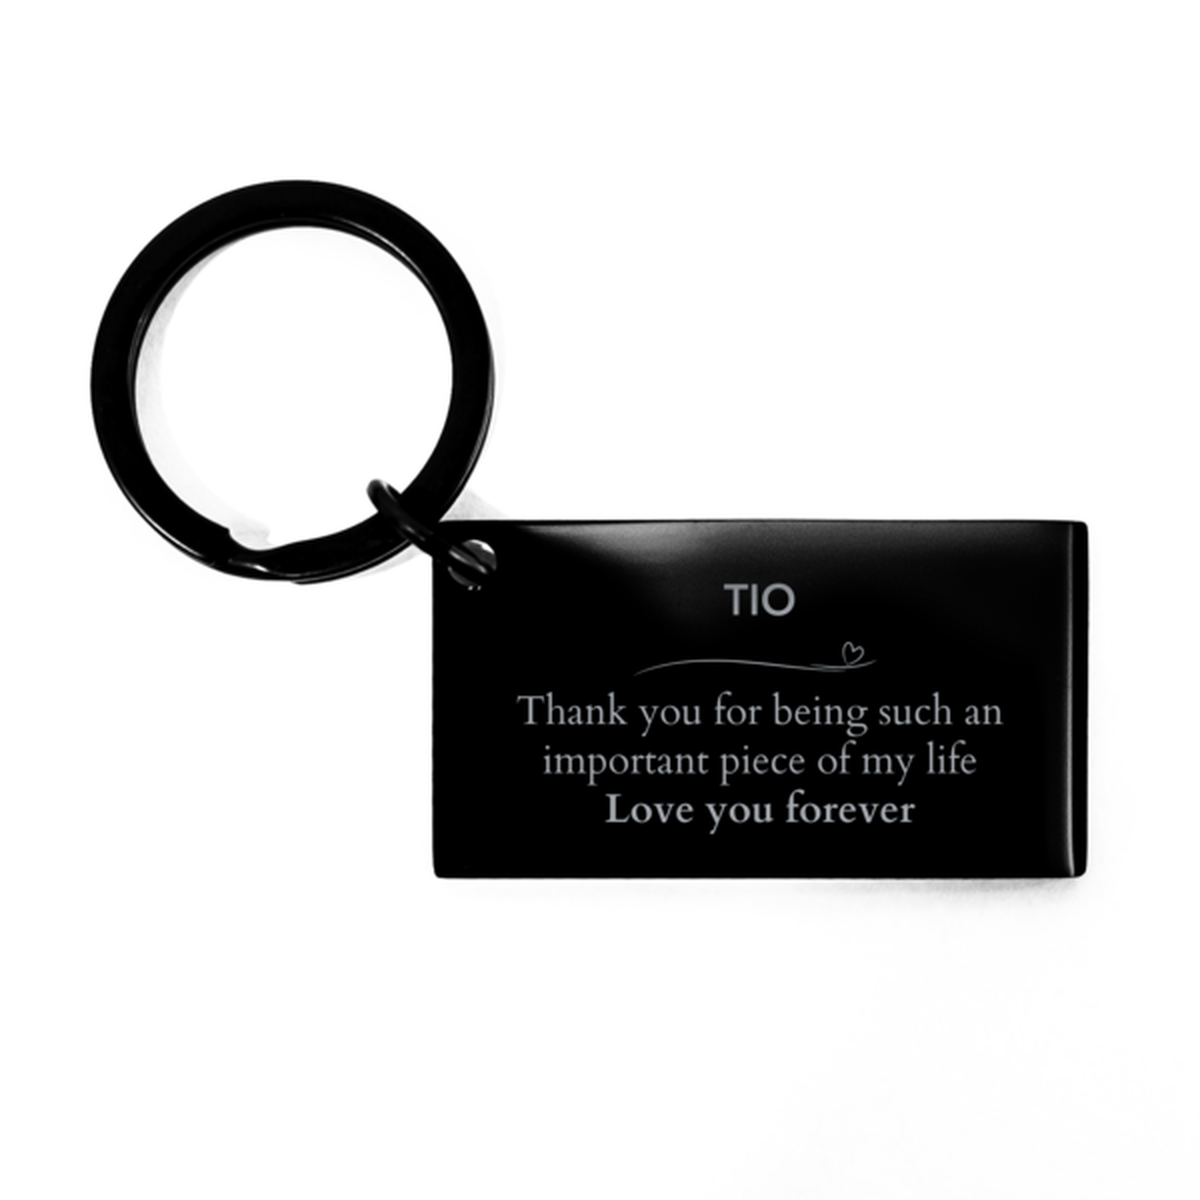 Appropriate Tio Keychain Epic Birthday Gifts for Tio Thank you for being such an important piece of my life Tio Christmas Mothers Fathers Day